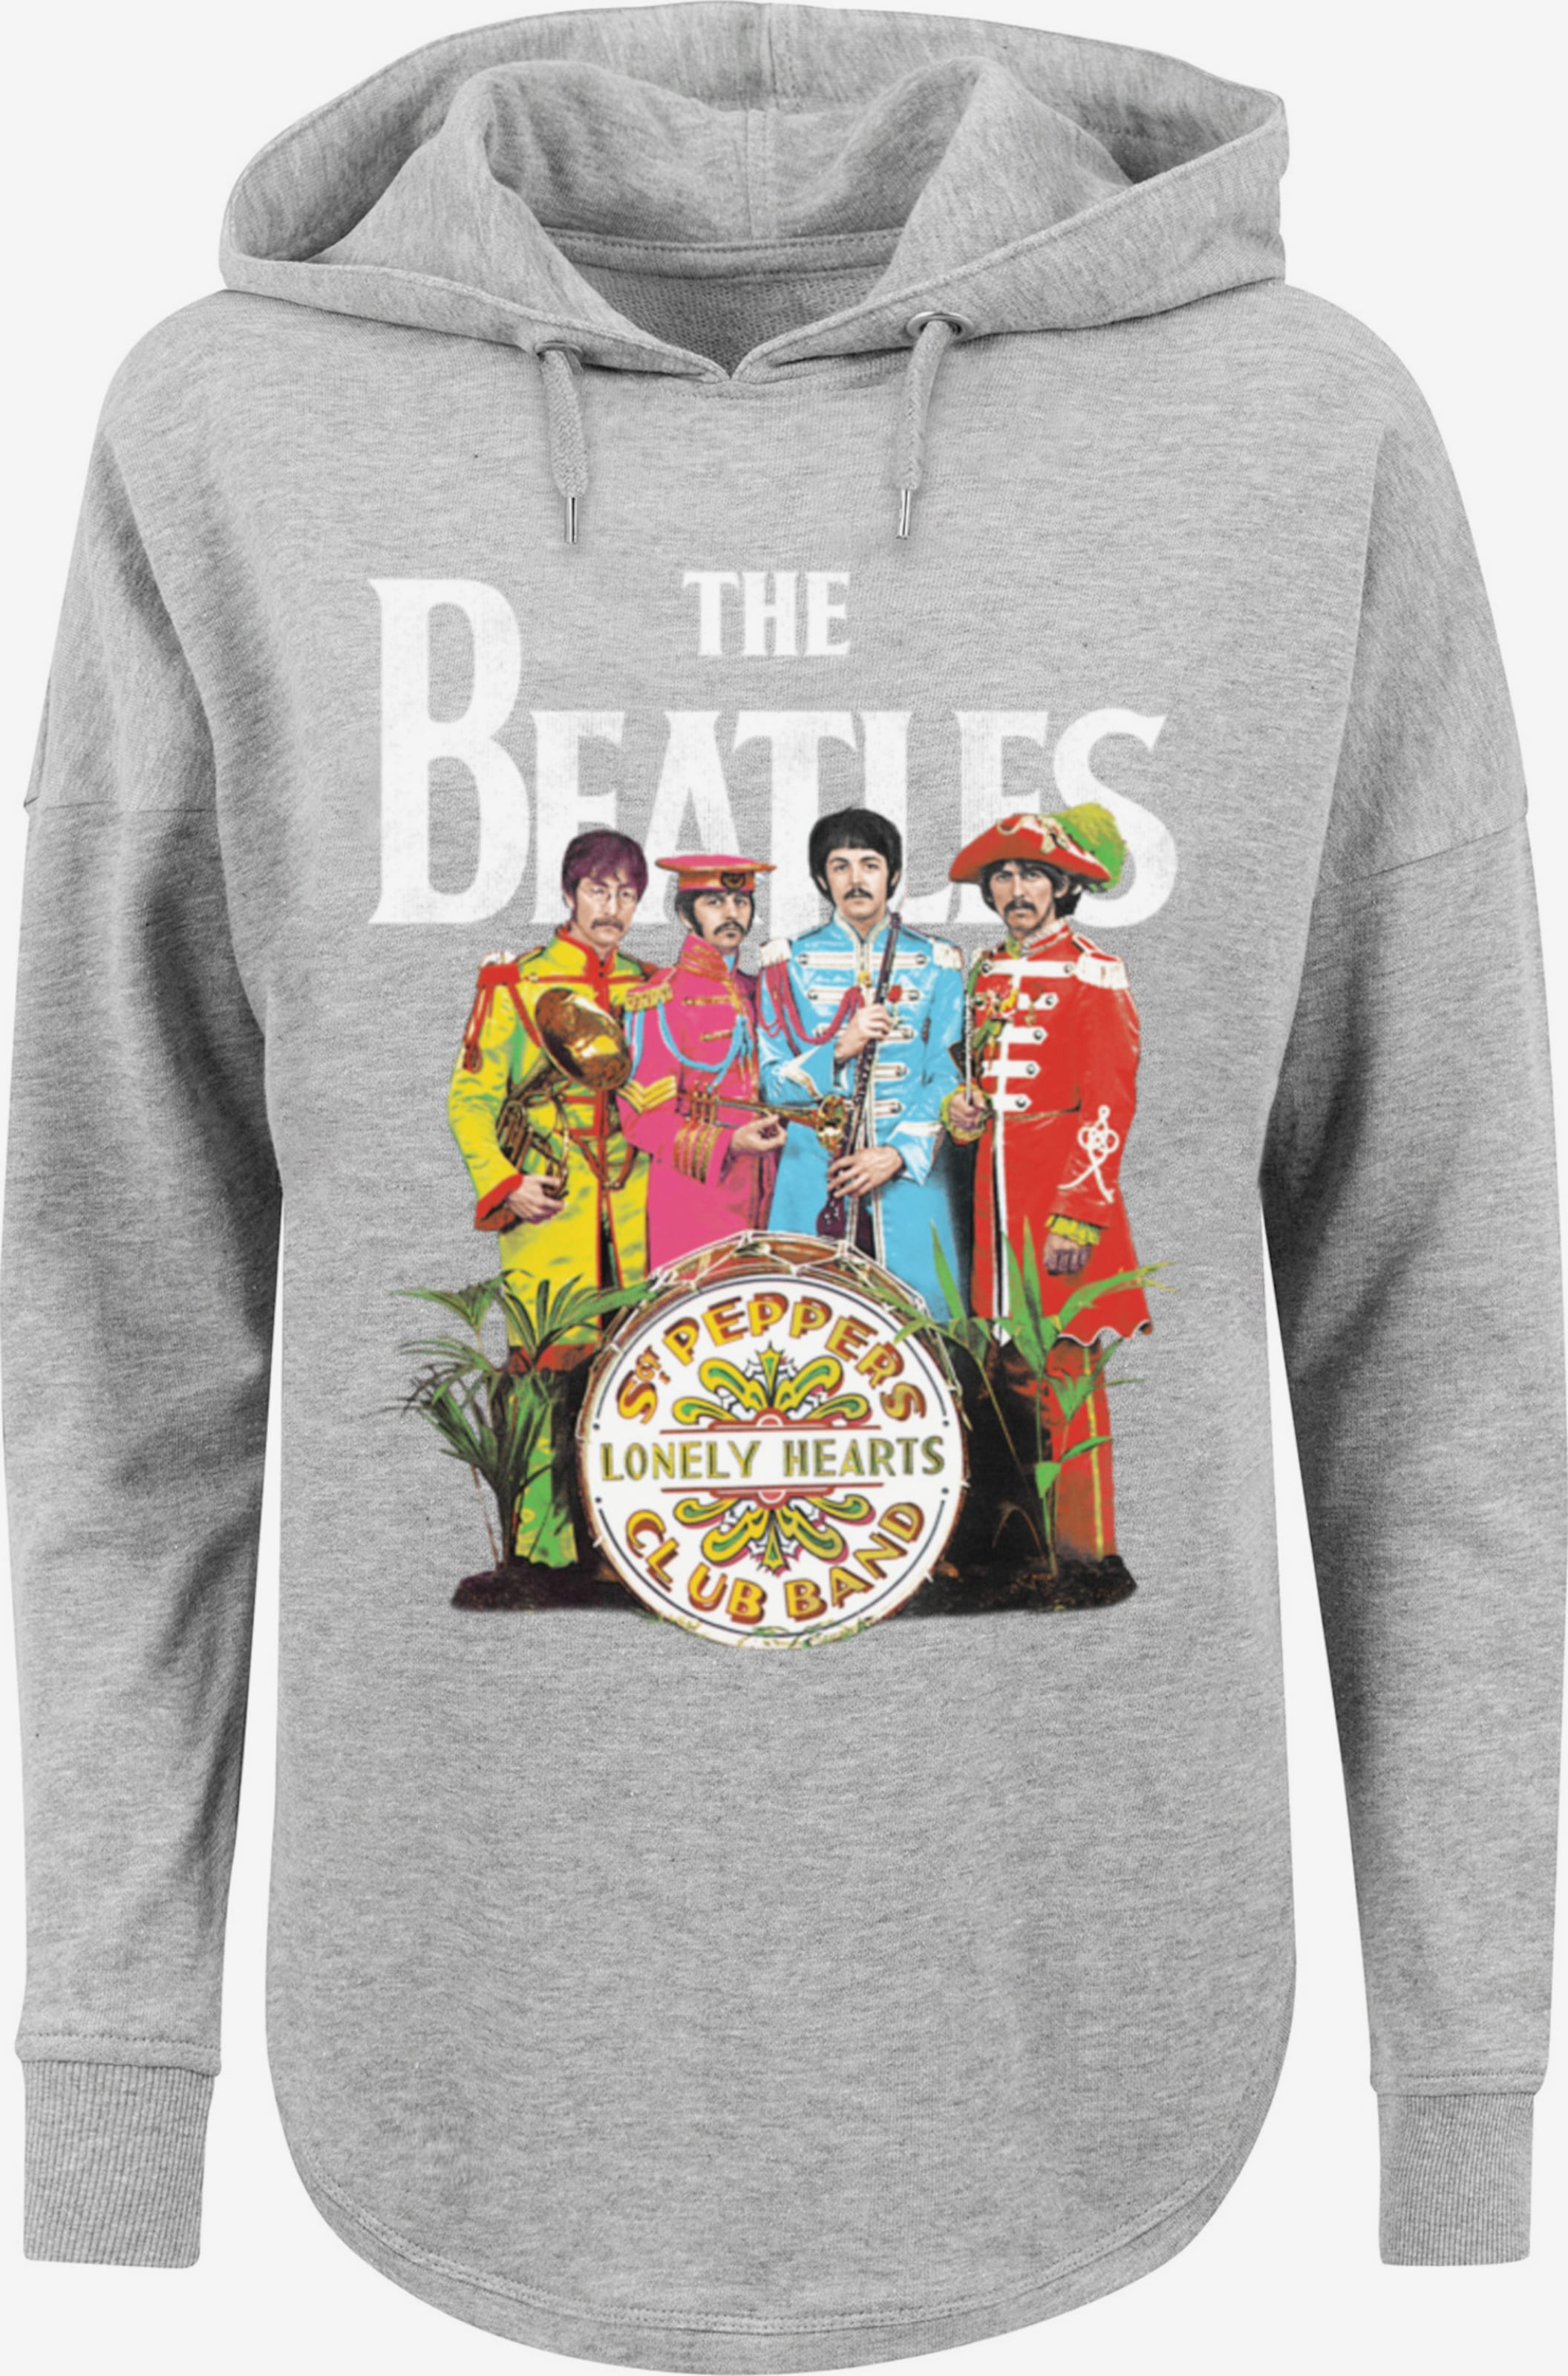 F4NT4STIC Sweatshirt \'The Beatles Band Sgt Pepper Black\' in Grau | ABOUT YOU